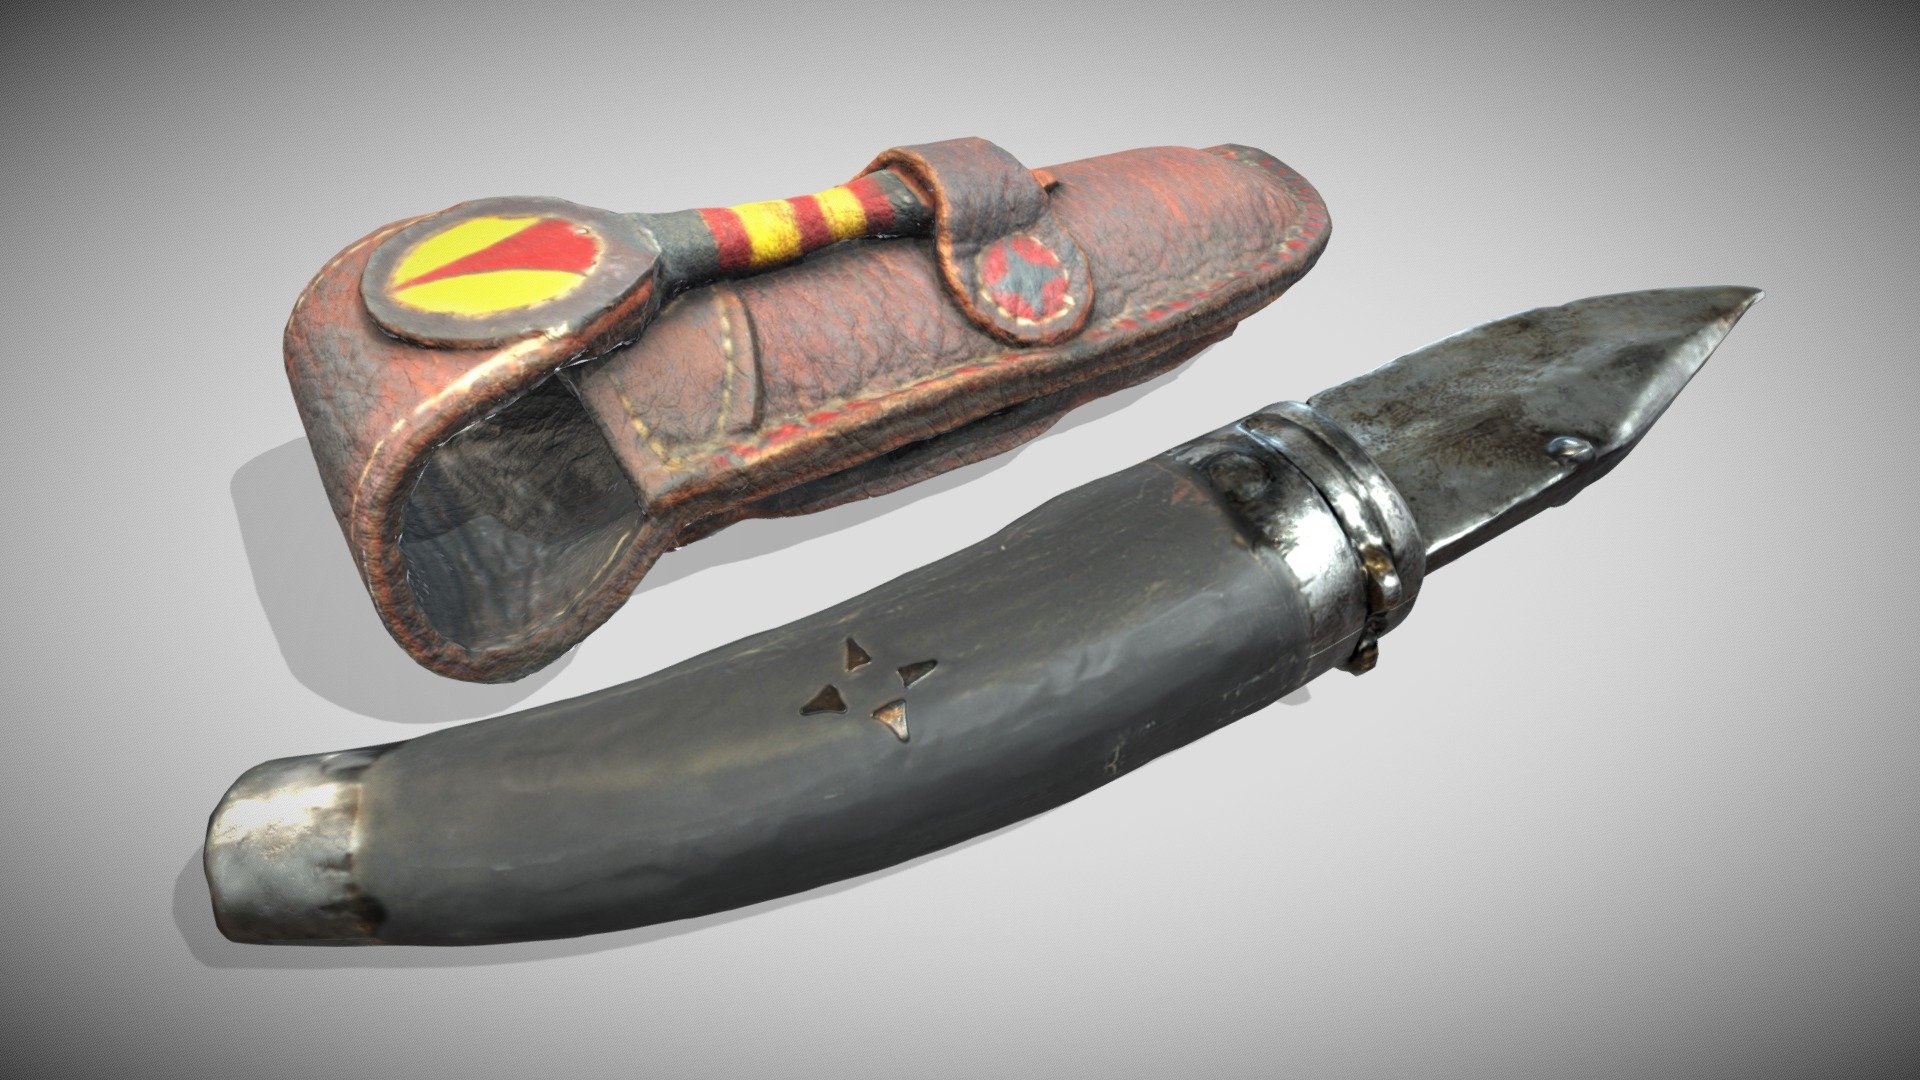 2 Material PBR Metalness 4k

Original Knife and Bag maded by Fonti - Fonti Knife - Buy Royalty Free 3D model by Francesco Coldesina (@topfrank2013) 3d model